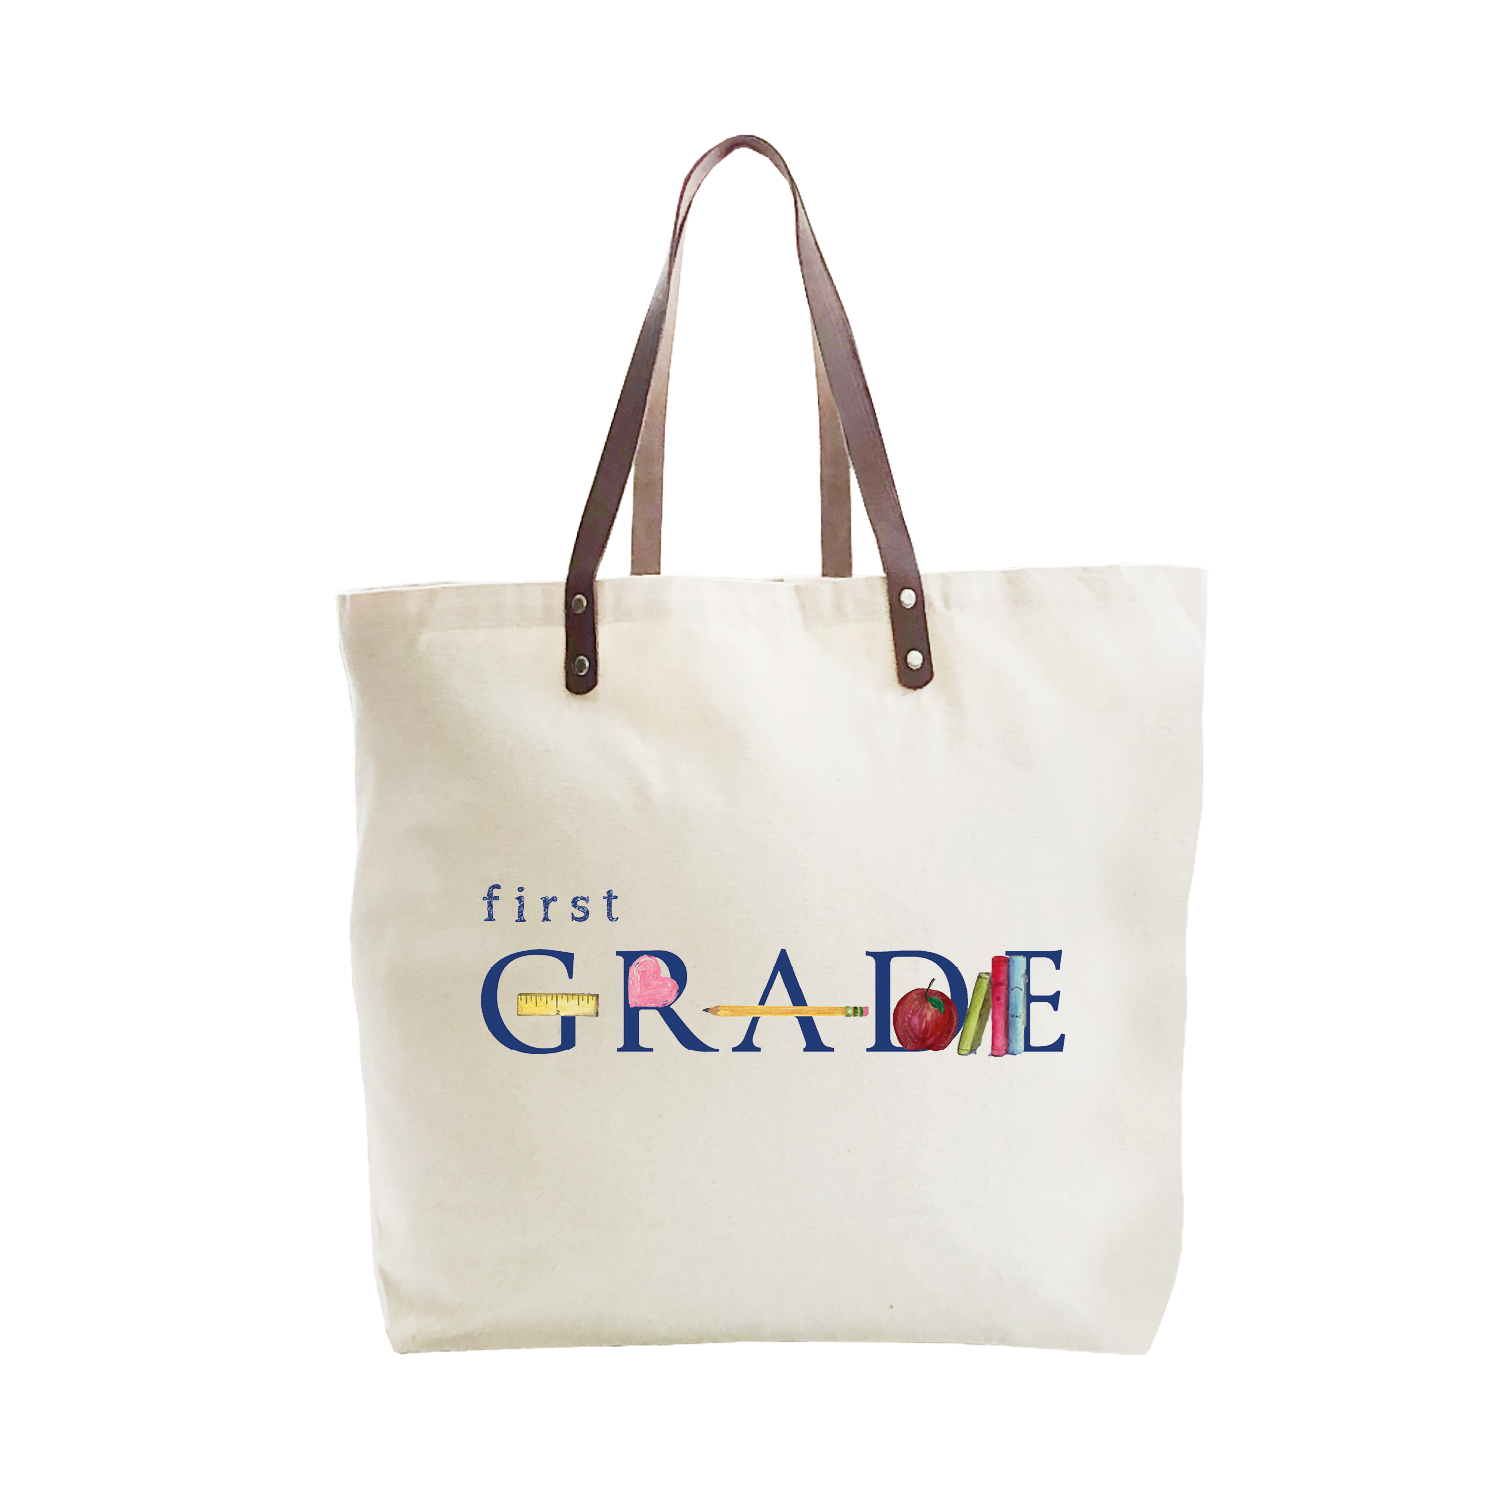 first grade large tote